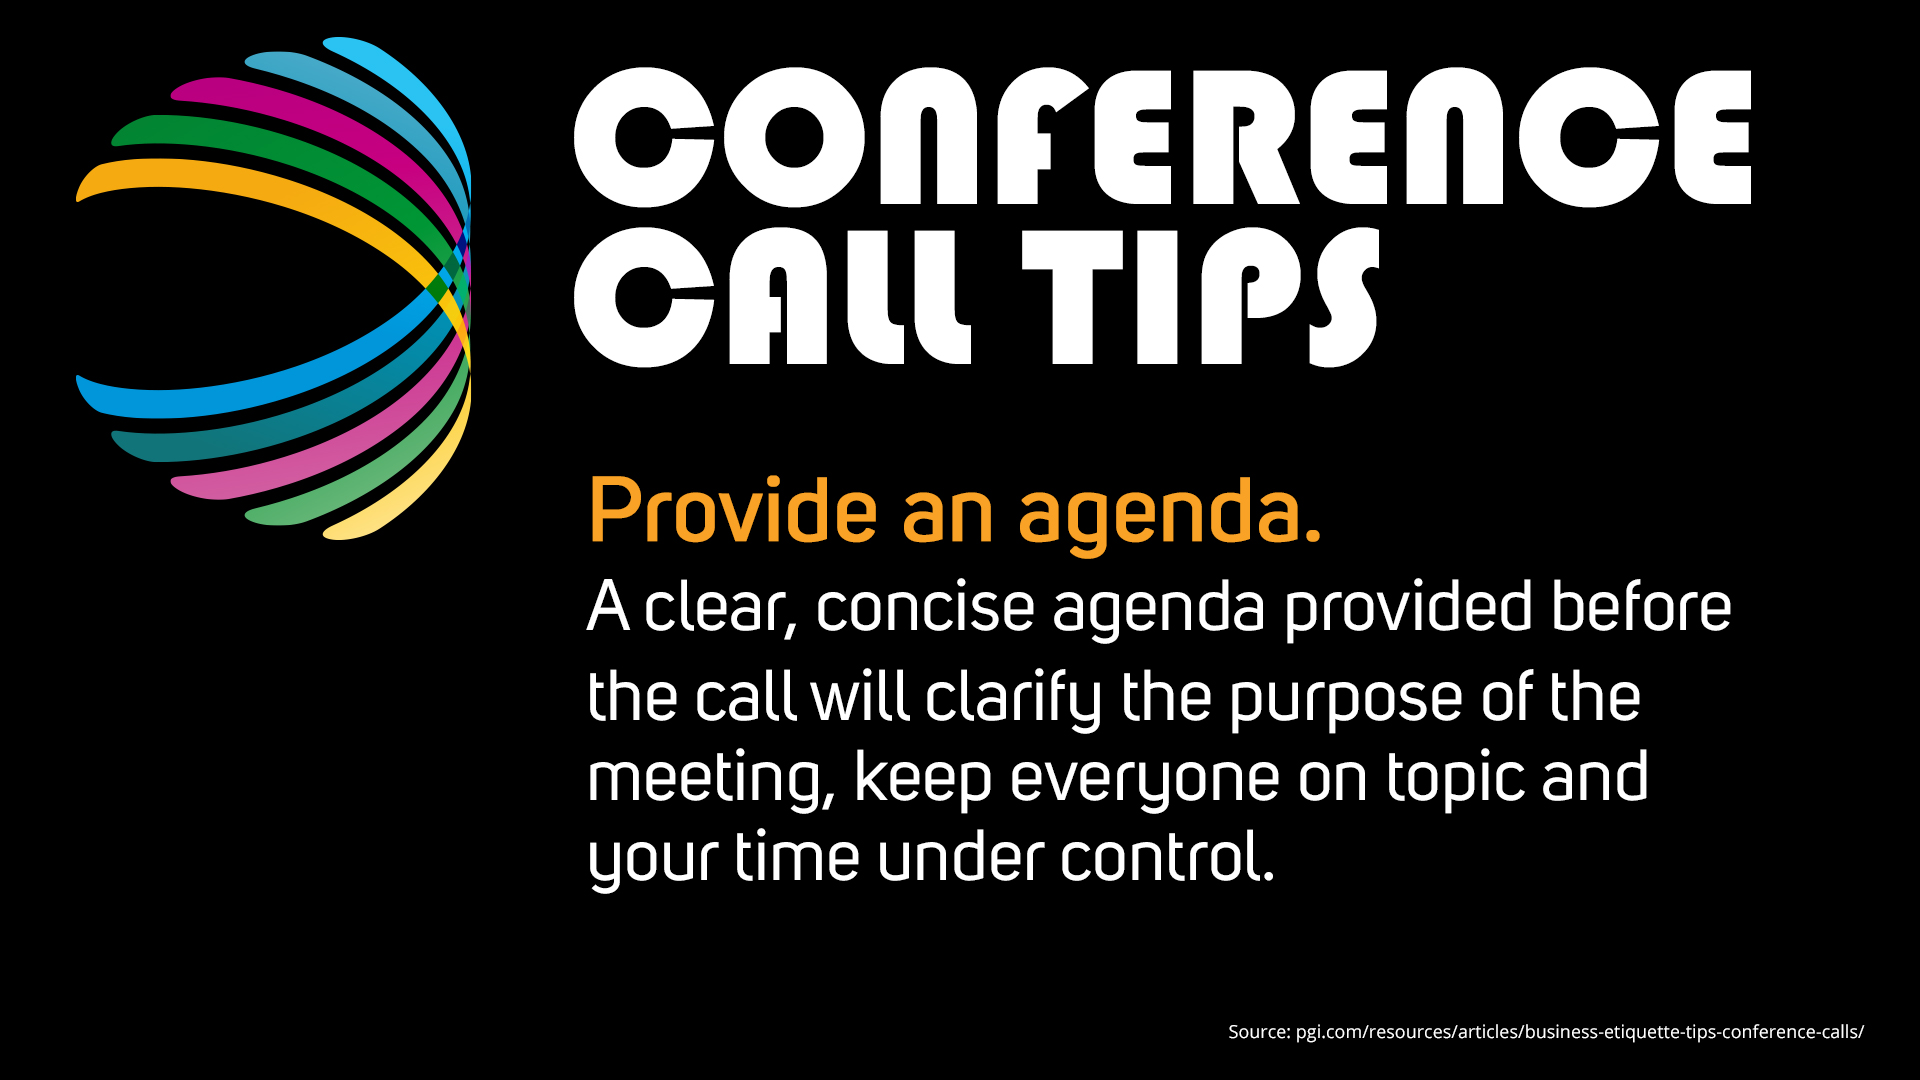 Free Graphic | Conference Call Tips | Provide an agenda